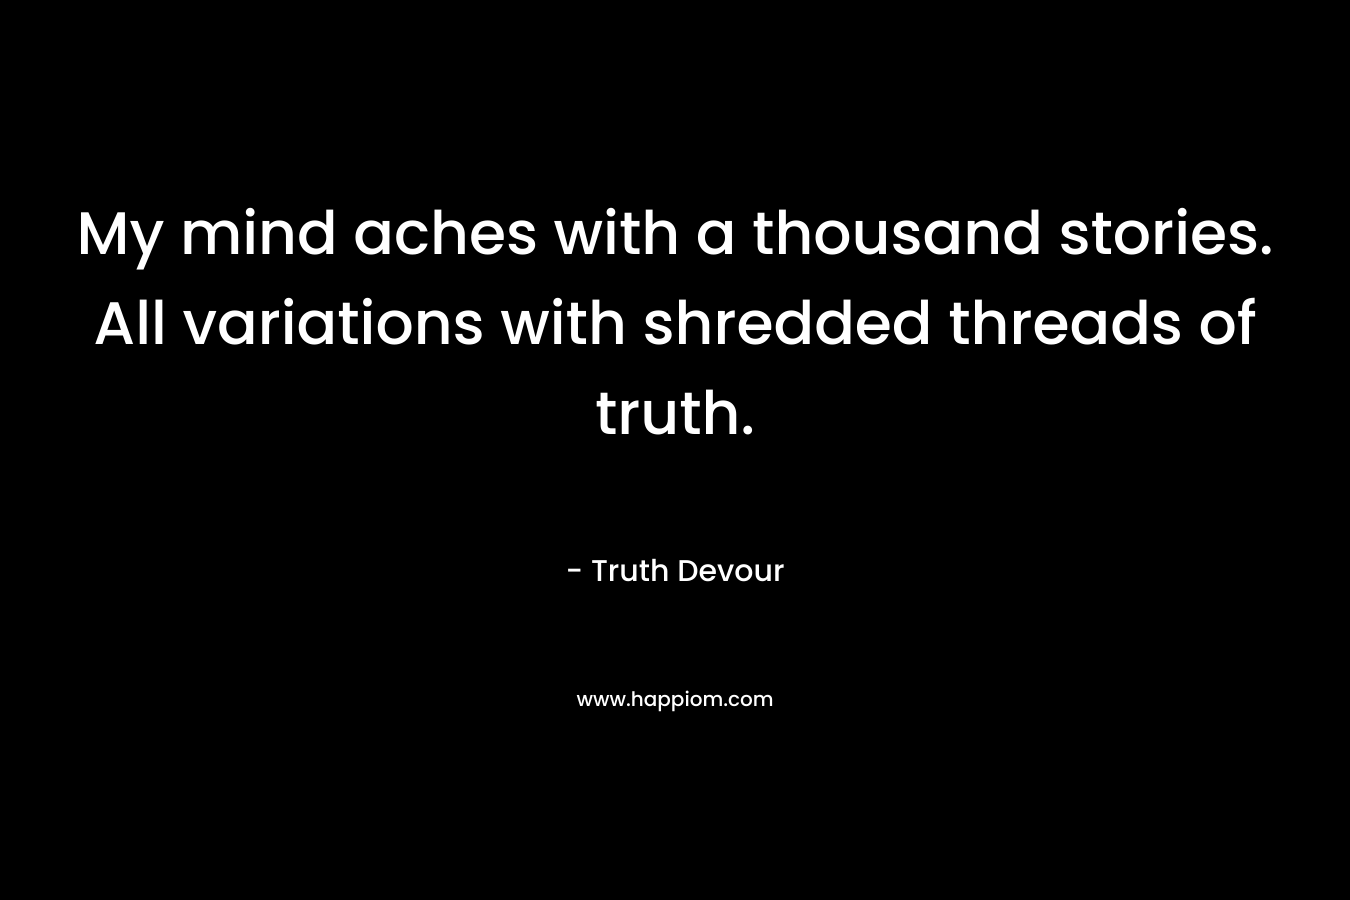 My mind aches with a thousand stories. All variations with shredded threads of truth.